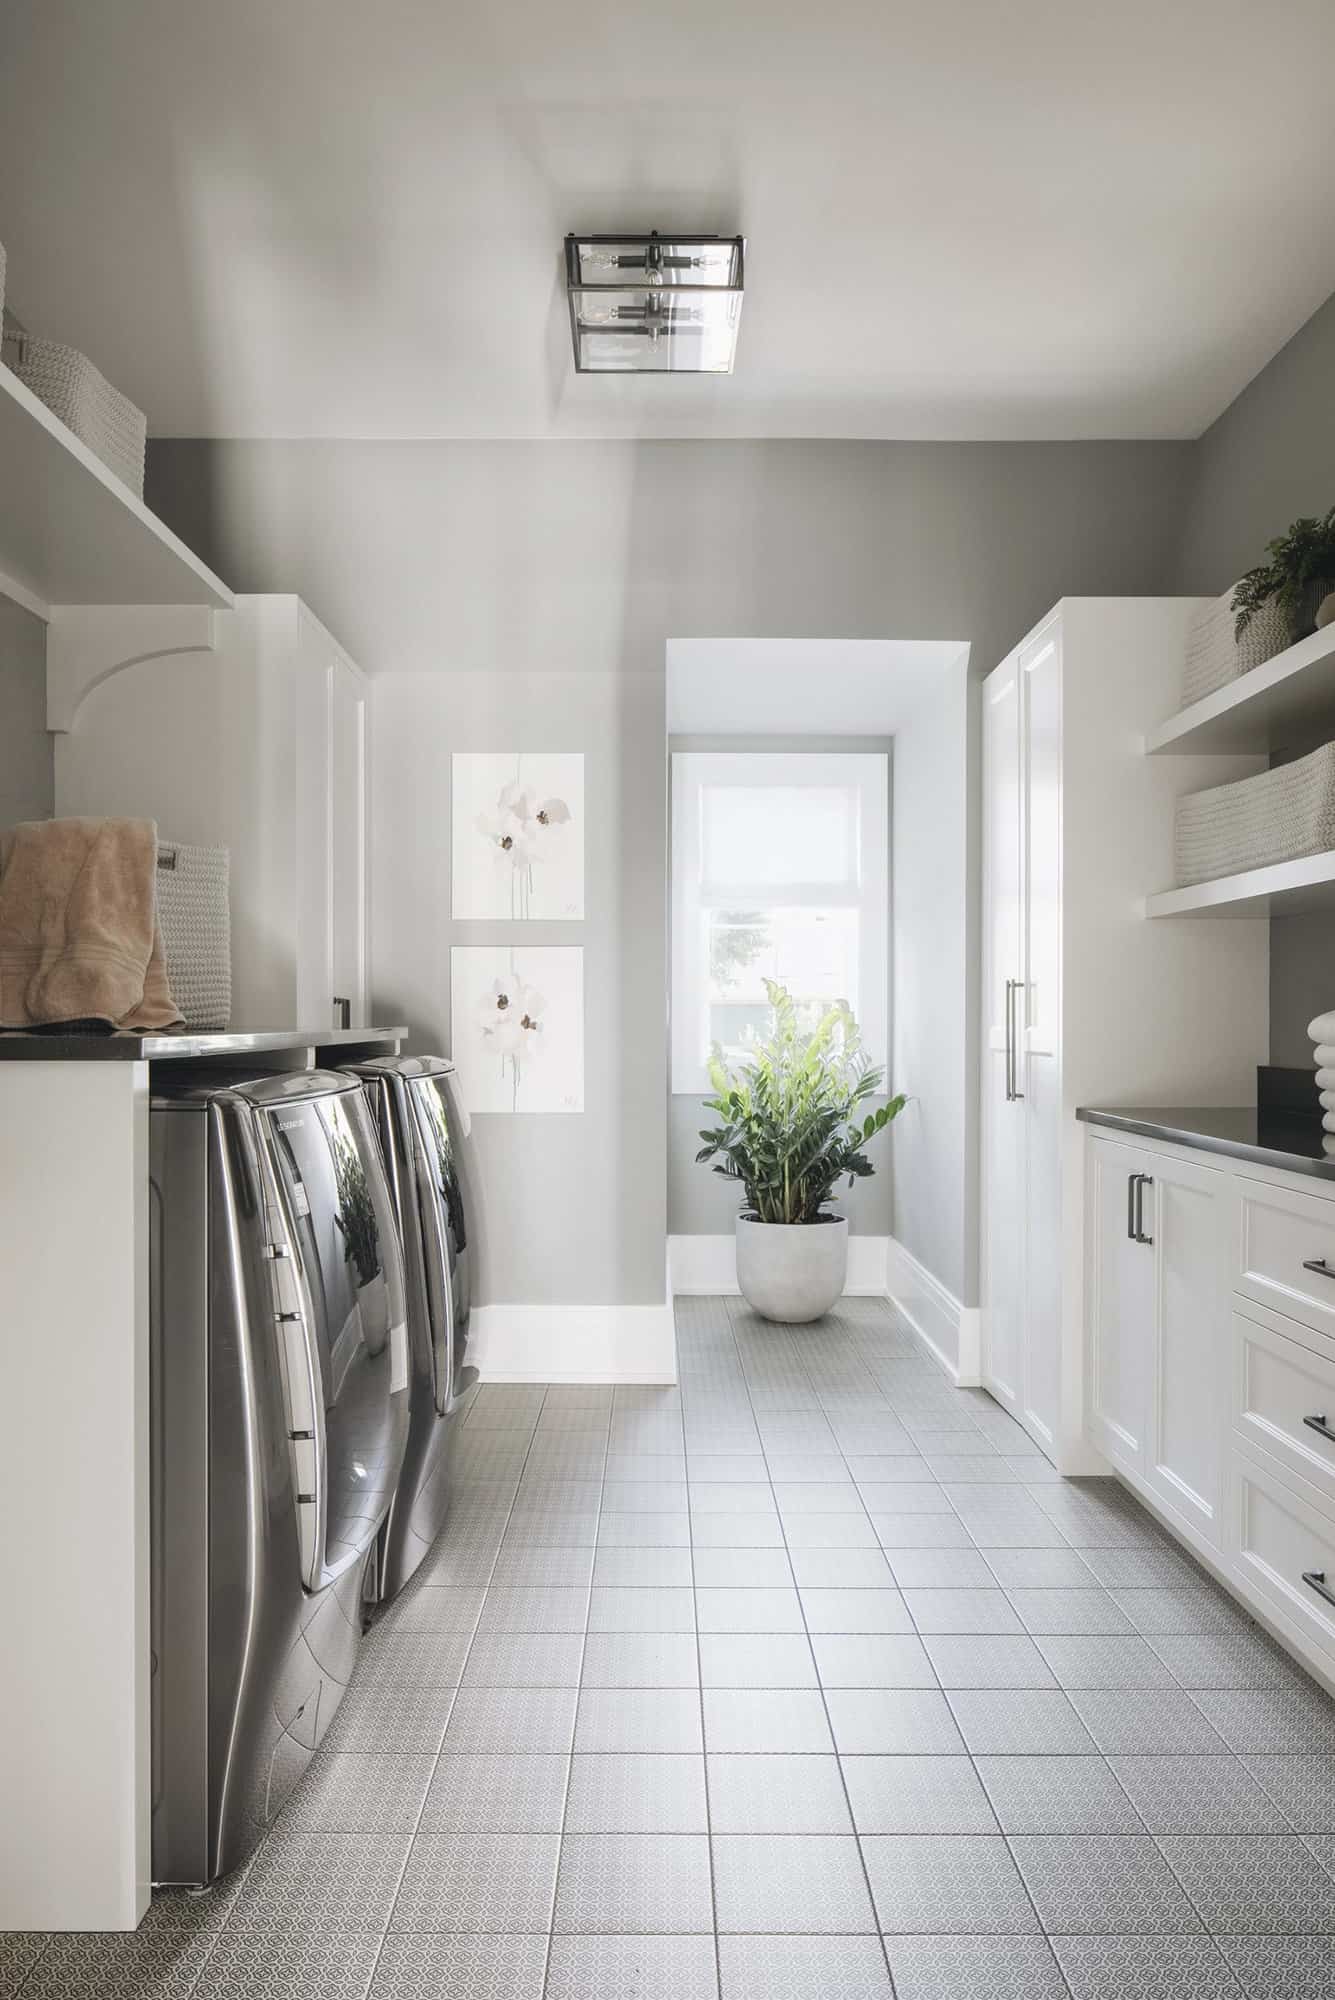   transitional-style-laundry-room